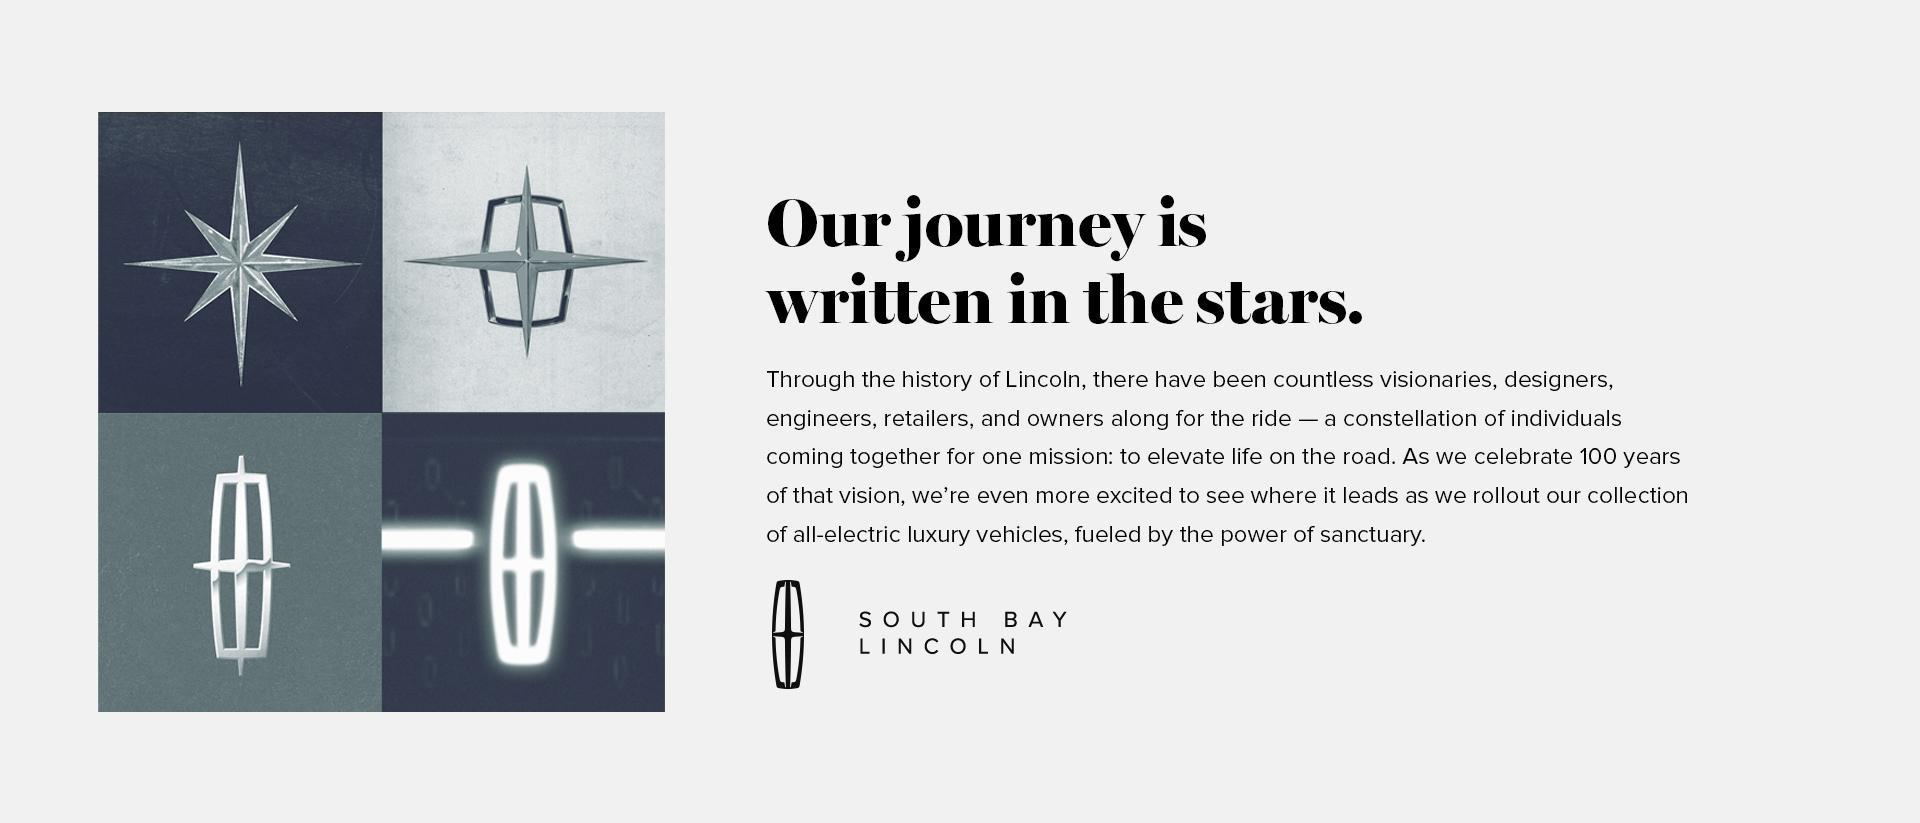 Our journey is written in the stars. Learn more at South Bay Lincoln